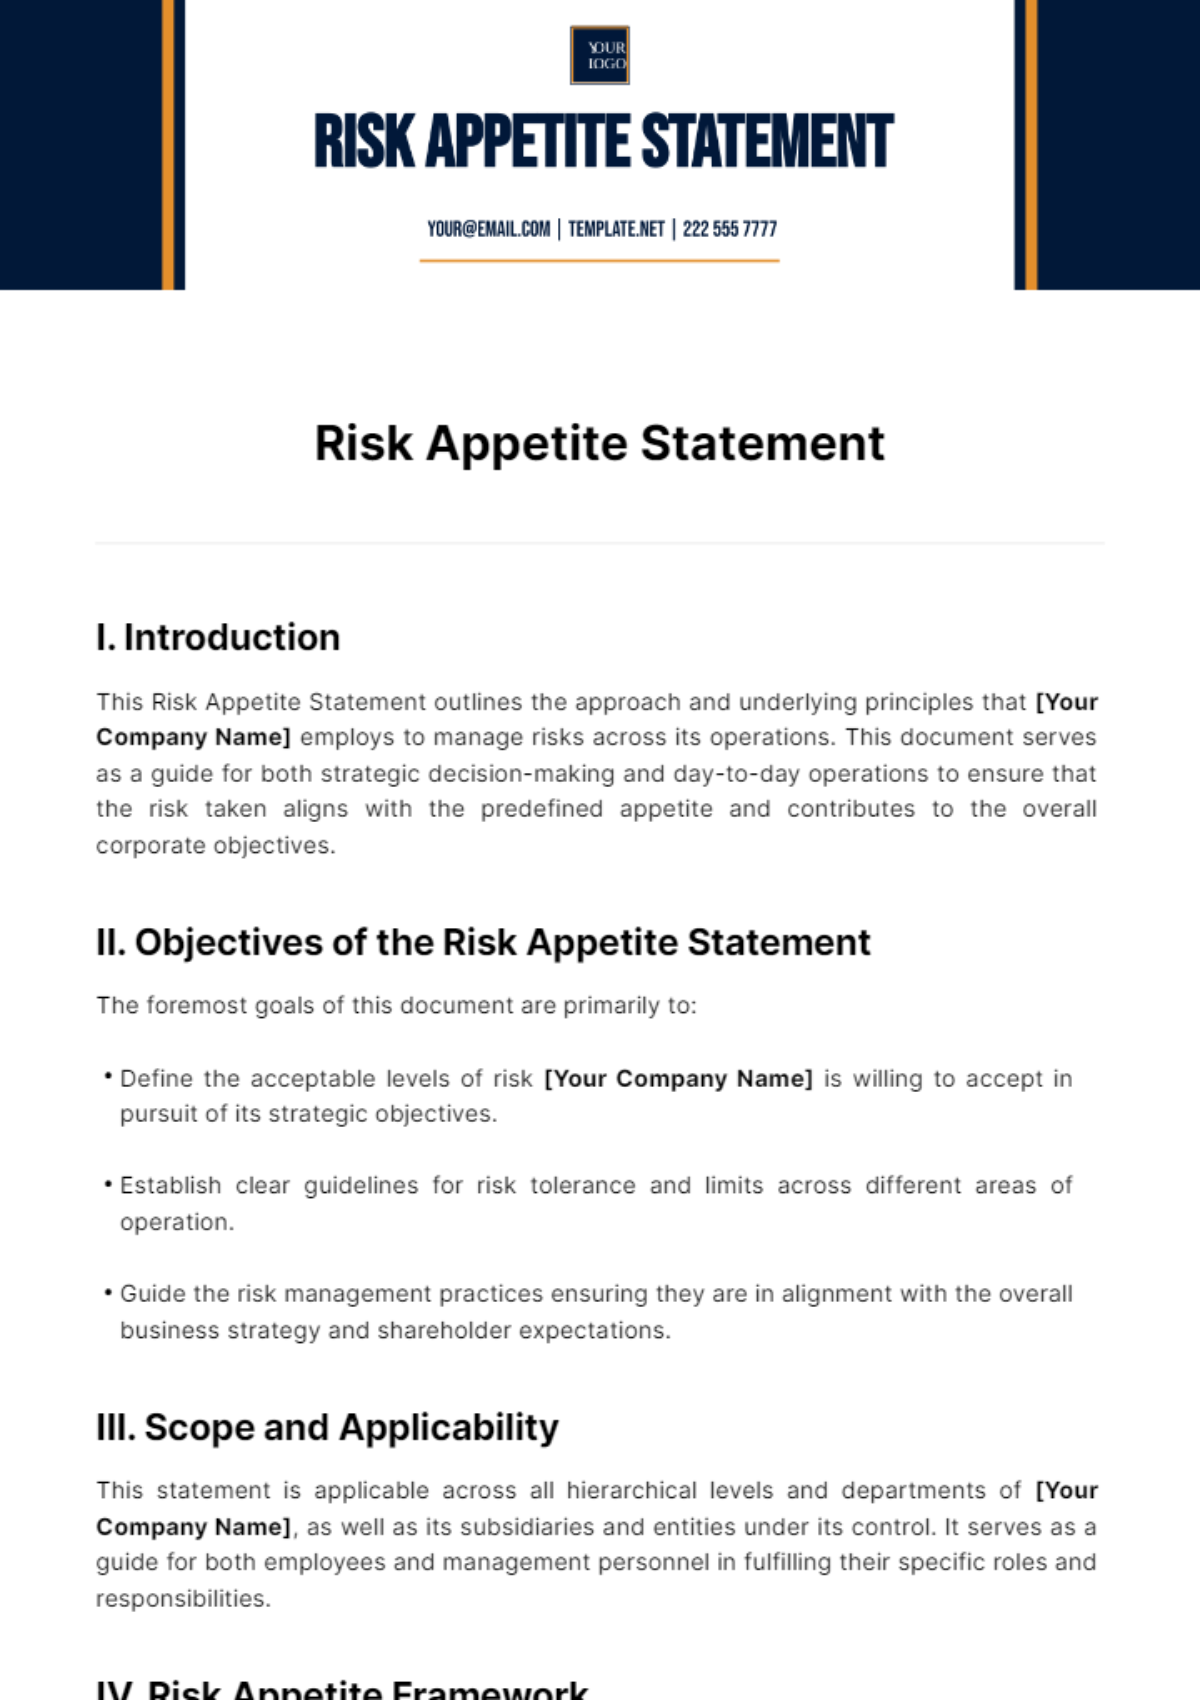 Risk Appetite Statement Template